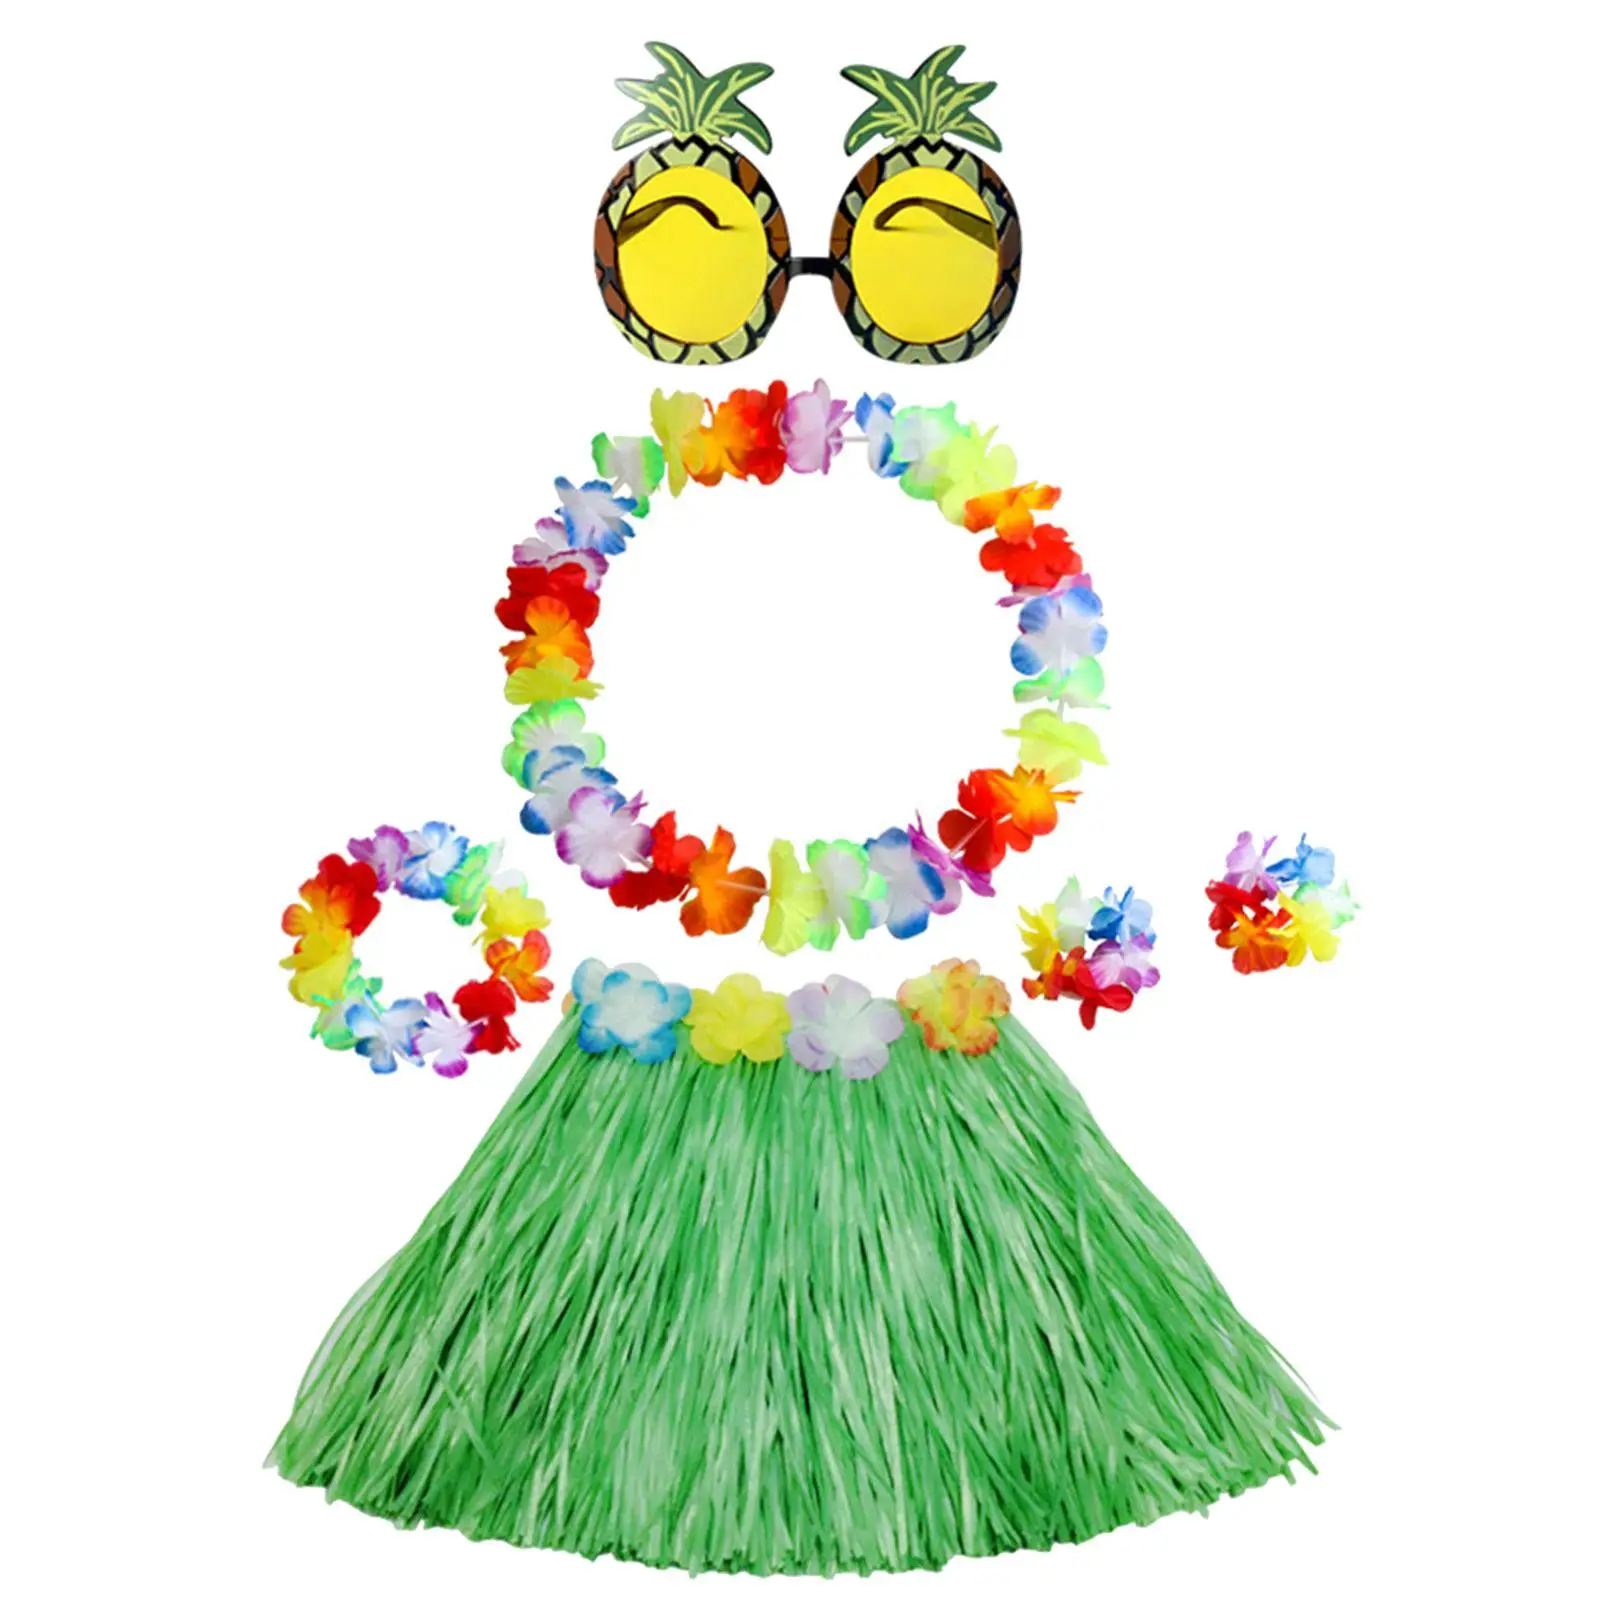 Pineapple Glasses with Wreath Women`s Dress Up Novelty Necklace for Tropical